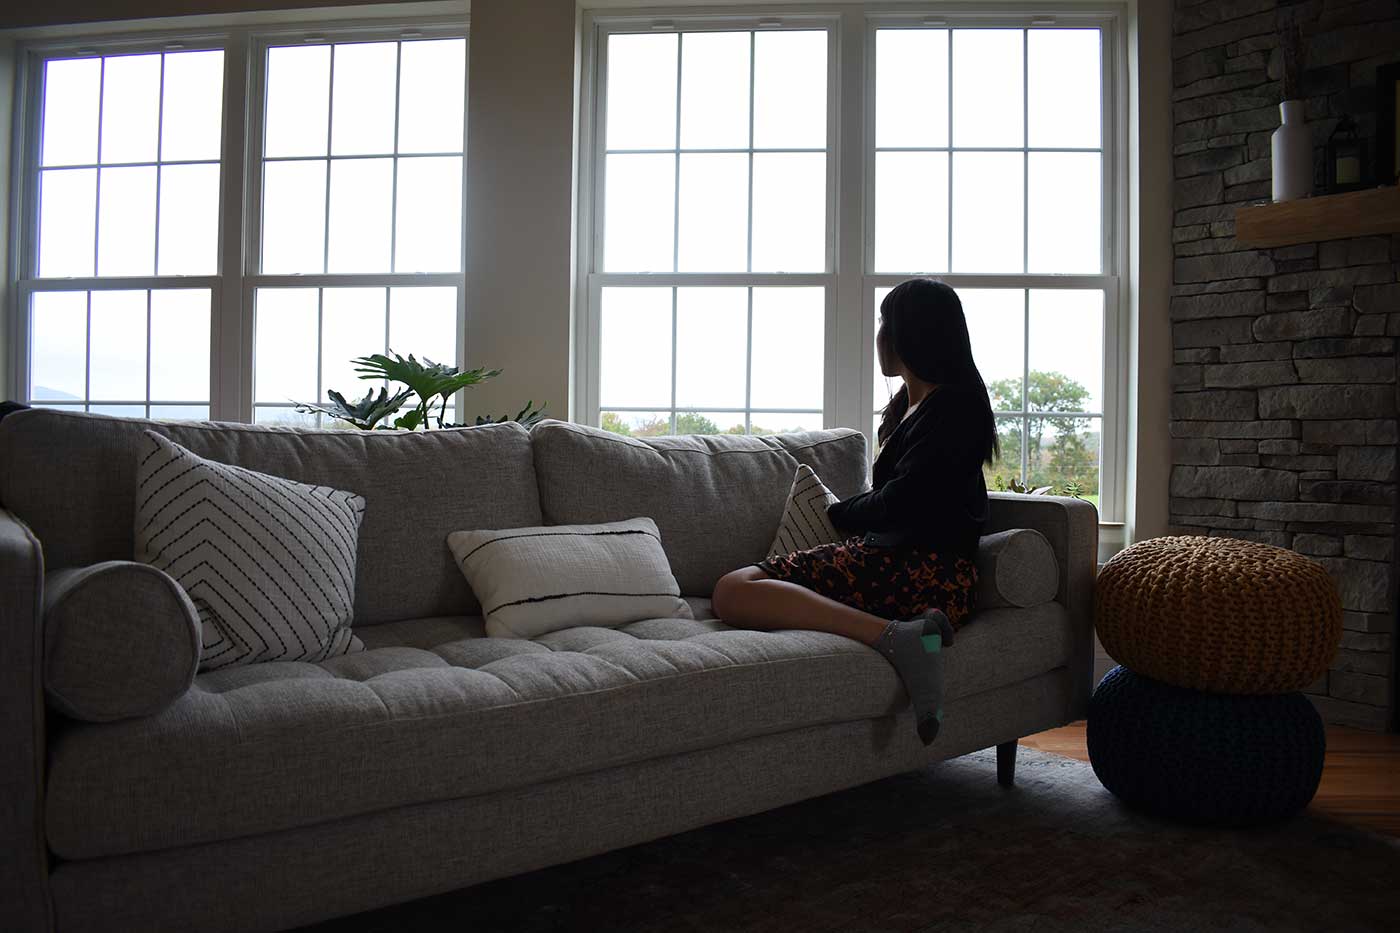 photograph of a person sitting on a couch looking out large windows.